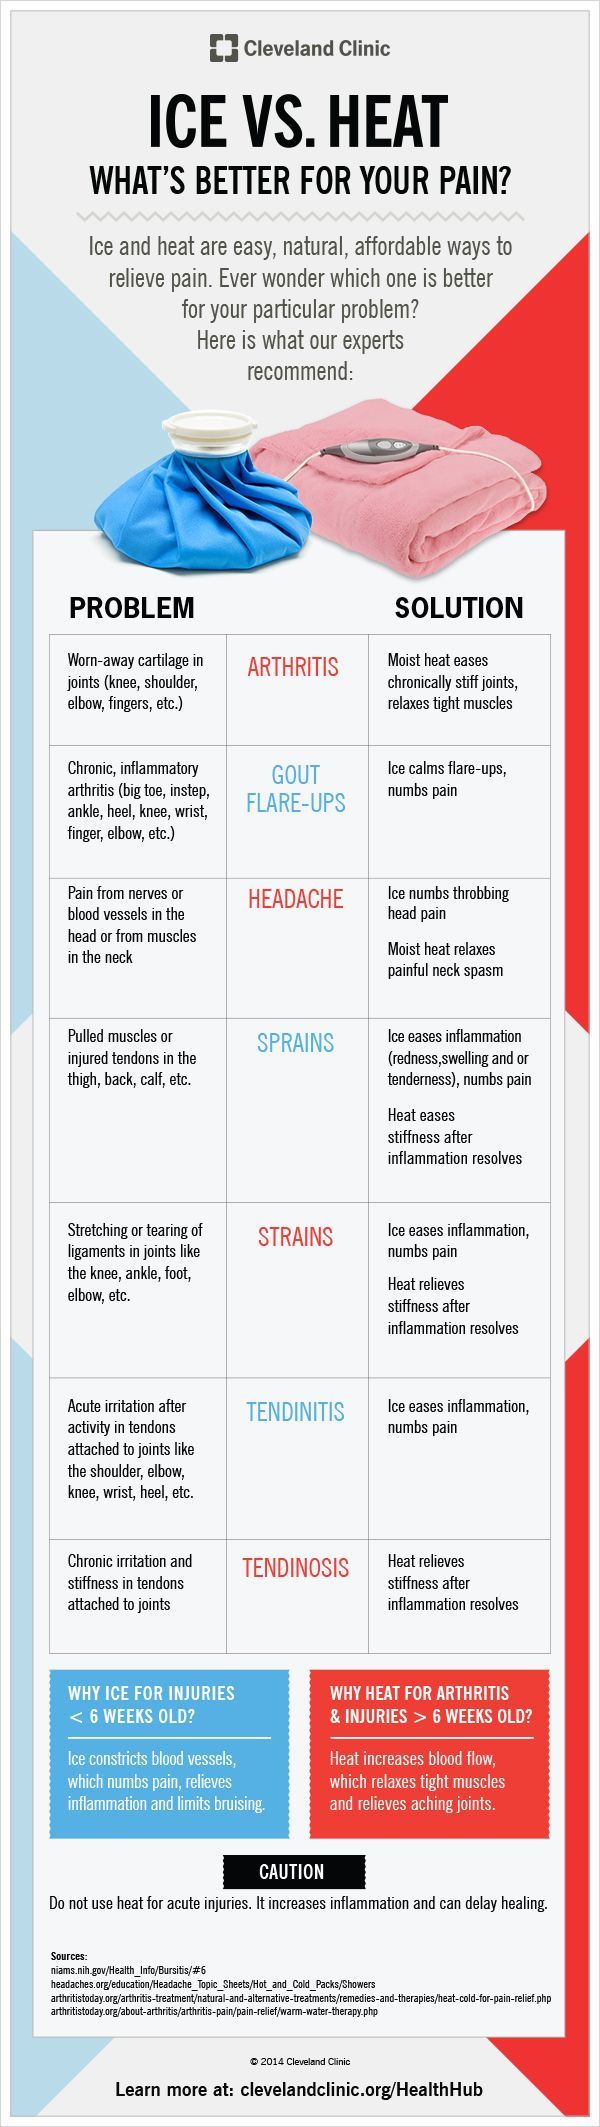 When something hurts, will ice or heat make it feel better? Infographic on HealthHub from Cleveland Clinic